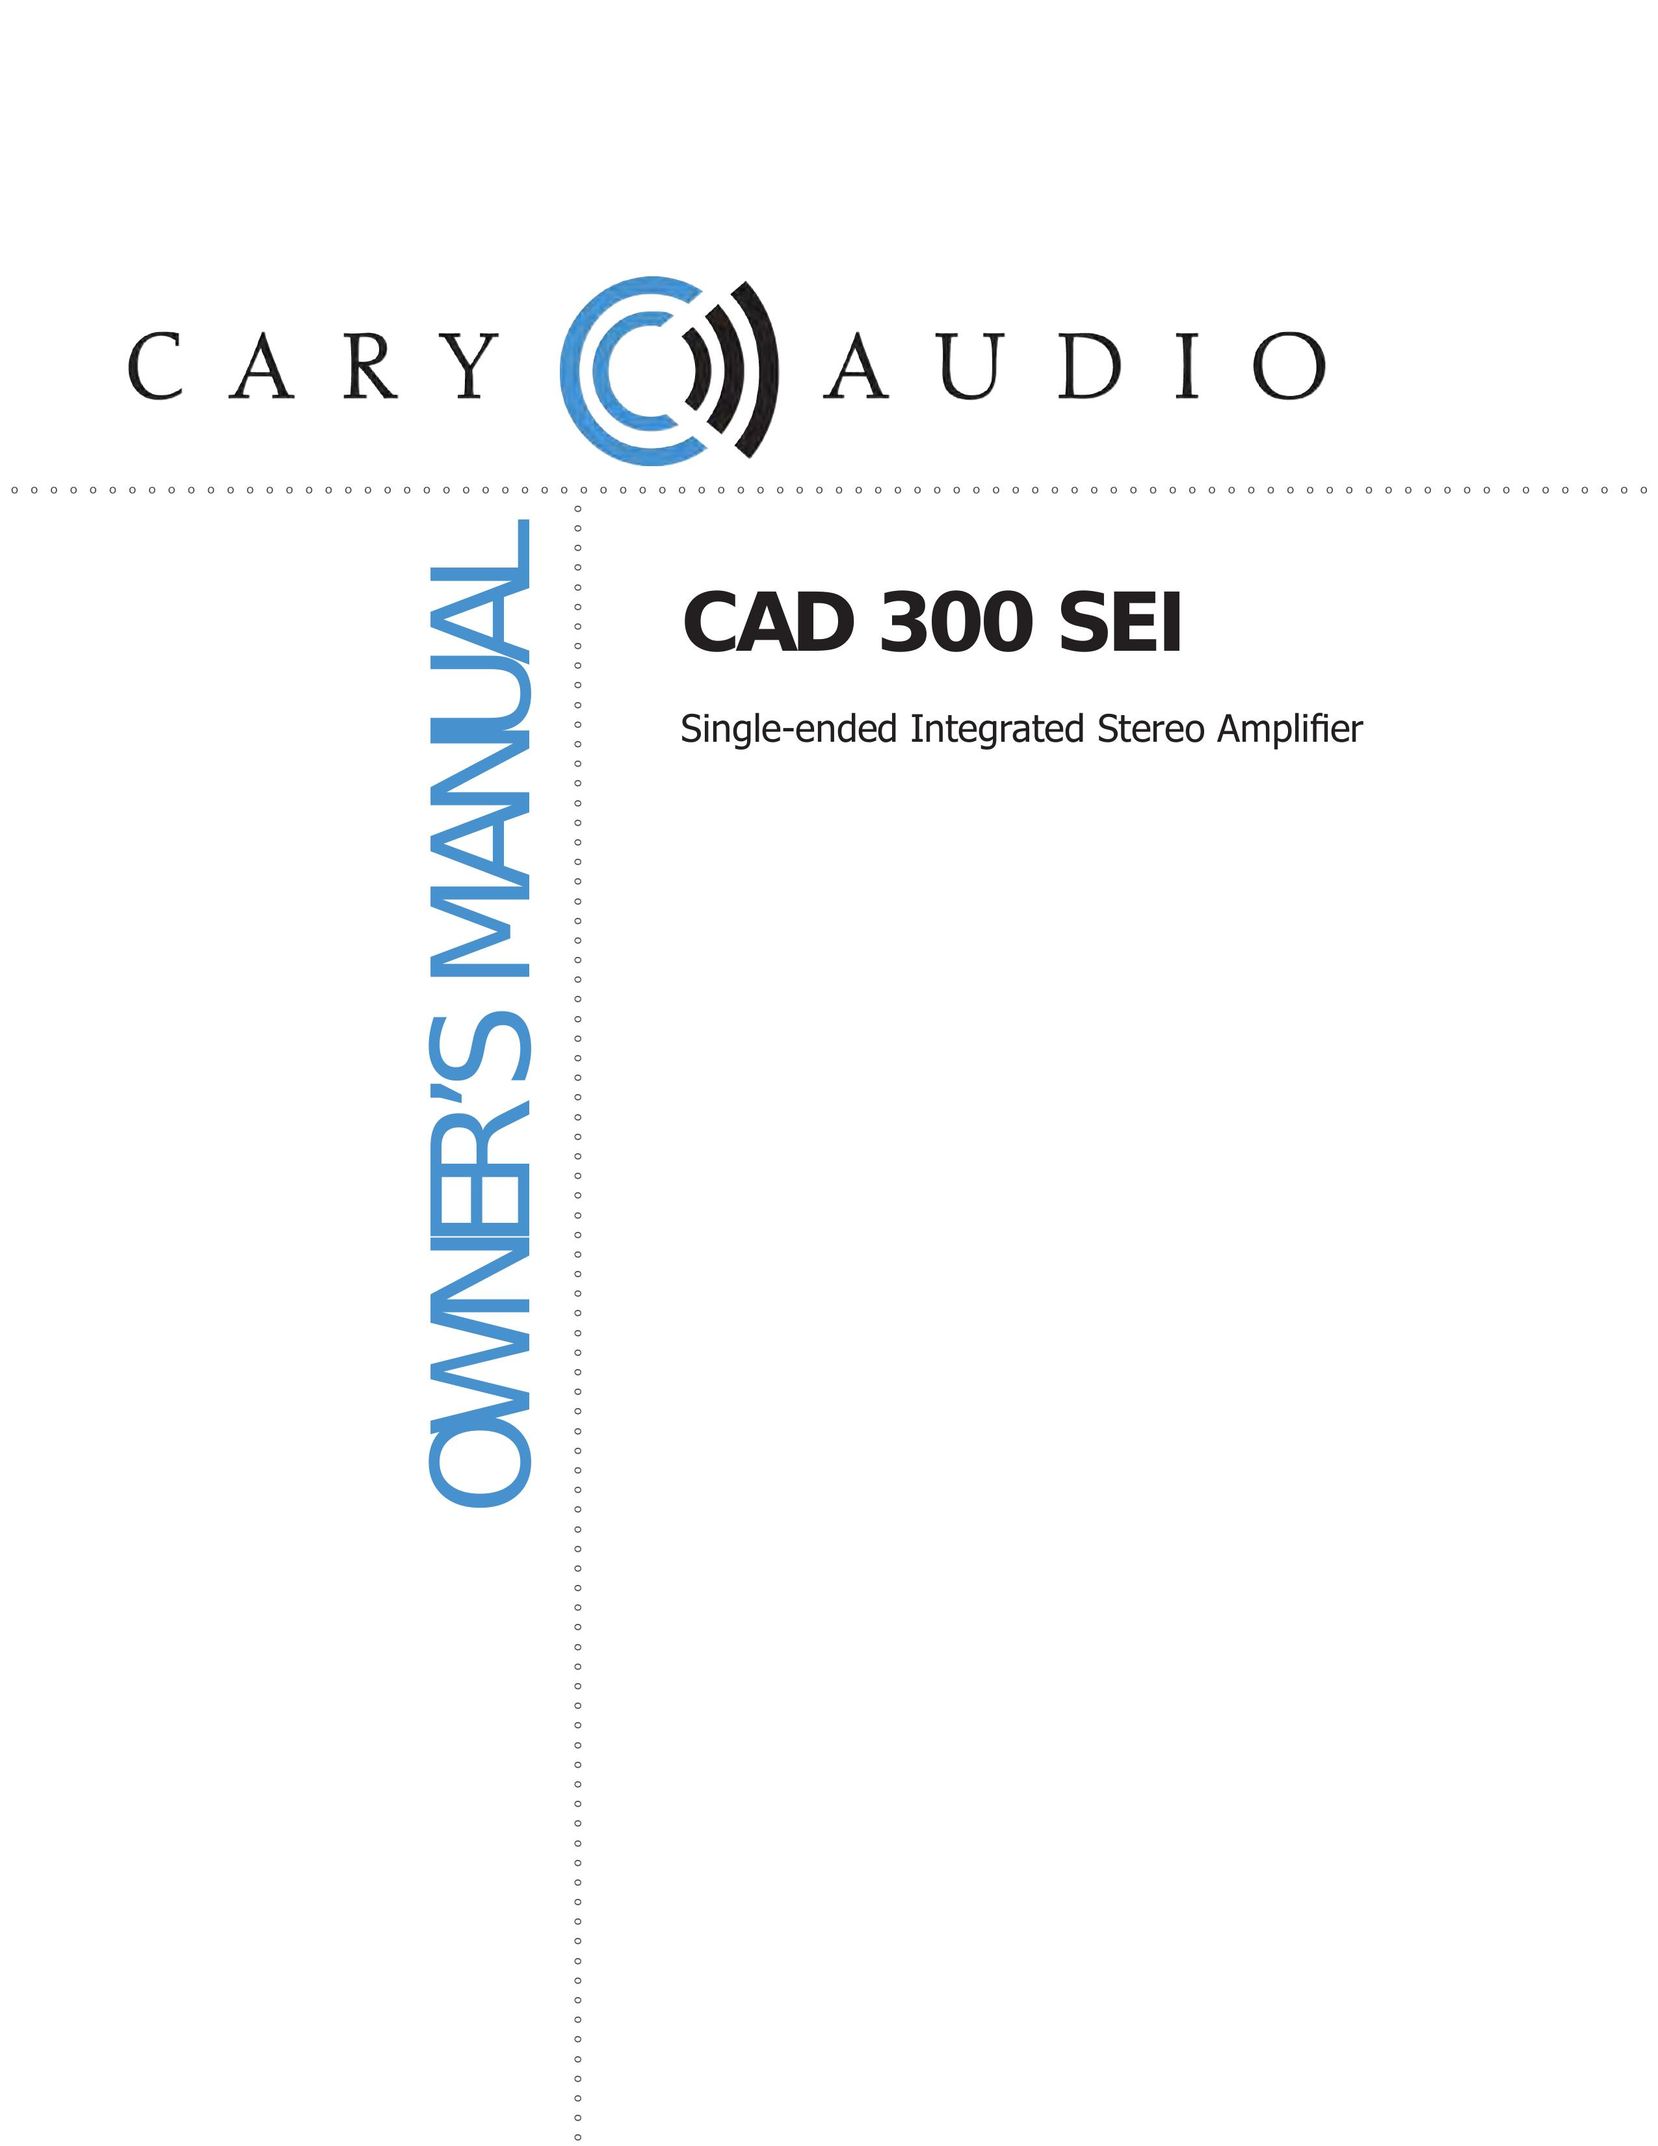 Cary Audio Design CAD 300 SEI Stereo Amplifier User Manual